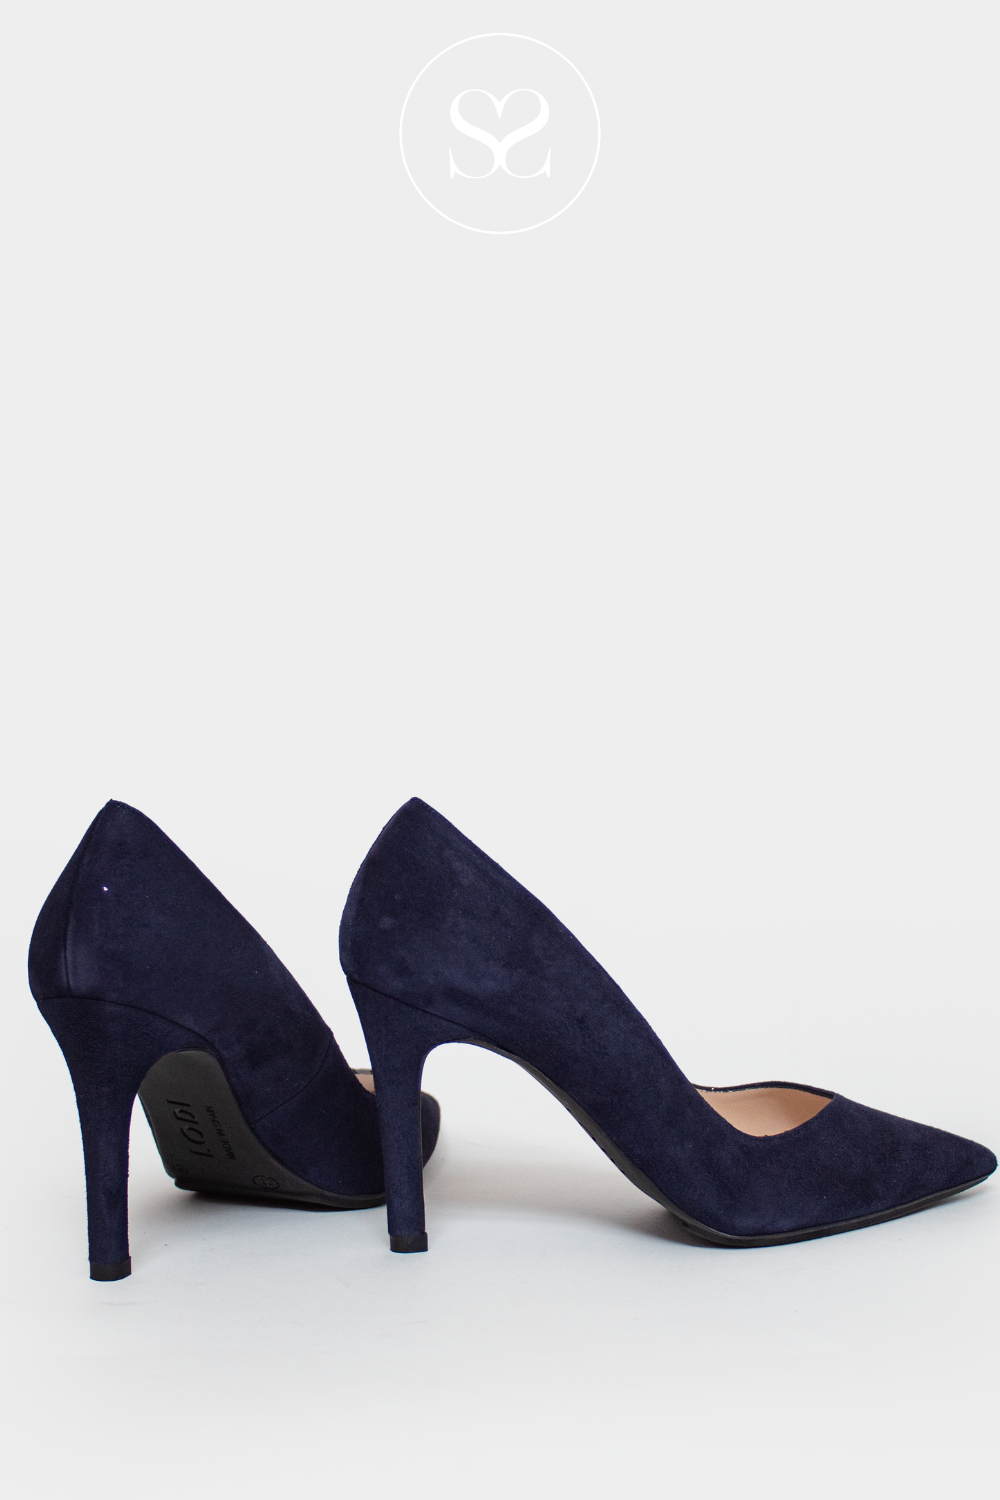 LODI RABOT NAVY SUEDE HIGH HEELED STILETTO WITH A POINTED TOE AND V-CUT FRONT